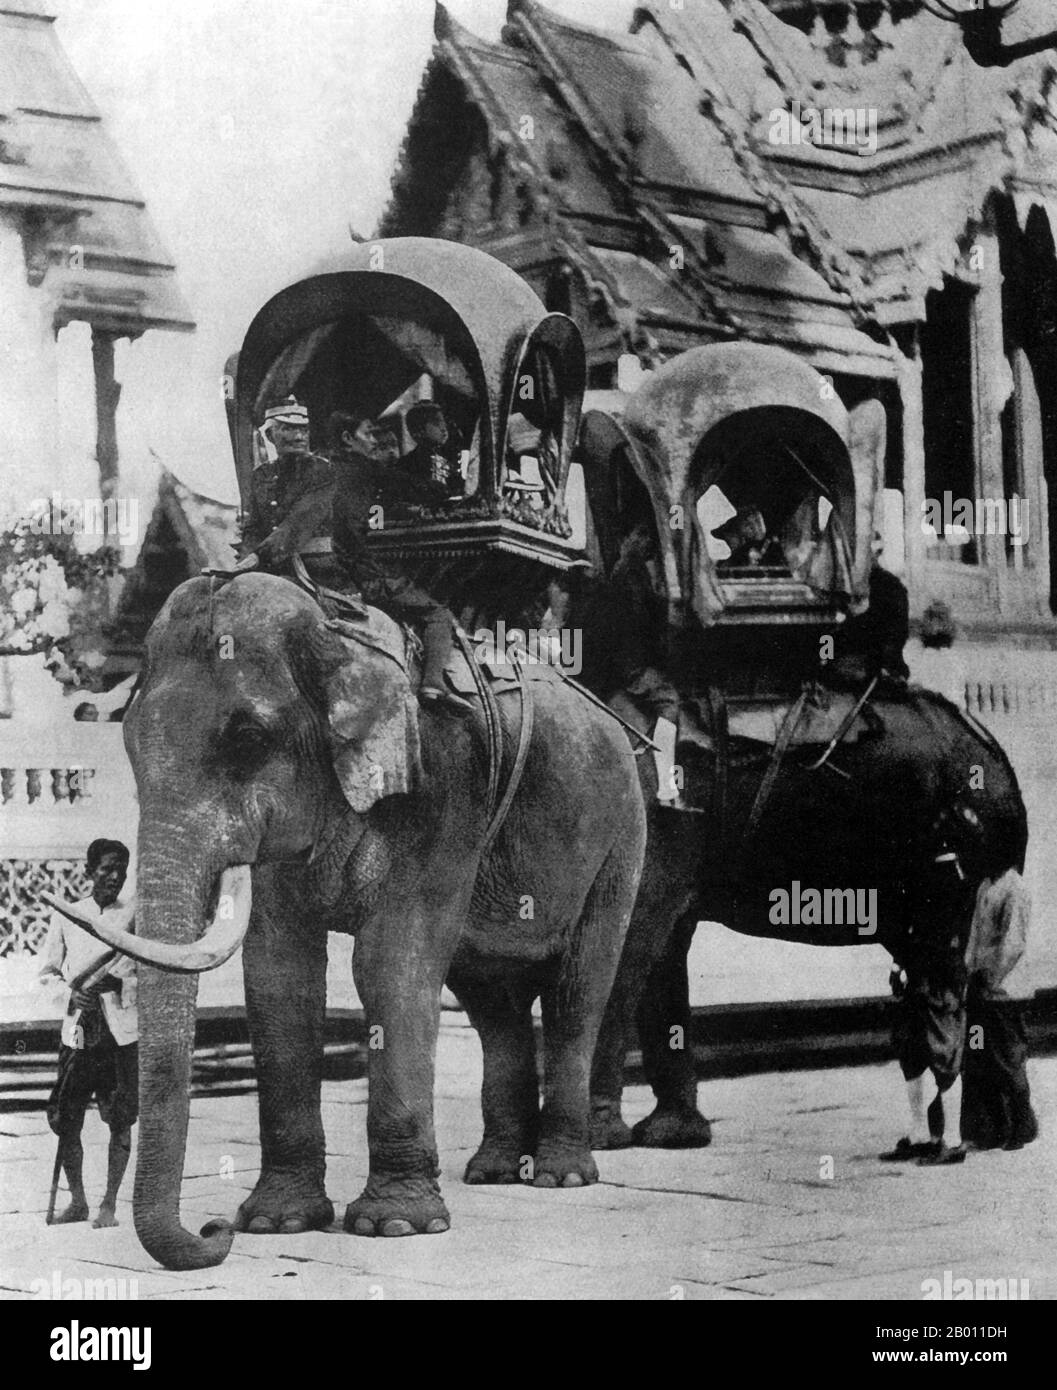 Thailand: Elephants caparisoned with howdahs carry the young princes in the courtyard of the Grand Palace in Bangkok, late 19th century.   In the 19th century, the Asian Elephant held a prominent position in Siam, although they were hunted regularly north of Ayutthaya and the Lao States (present day, Chiang Mai province and Isan). Not only were elephants used as beasts of burden in agriculture and for hauling timber, but they were active in war leading cavalry charges against the enemy. Elephants were frequently employed in the Siamese-Burmese wars of the Middle Ages. Stock Photo